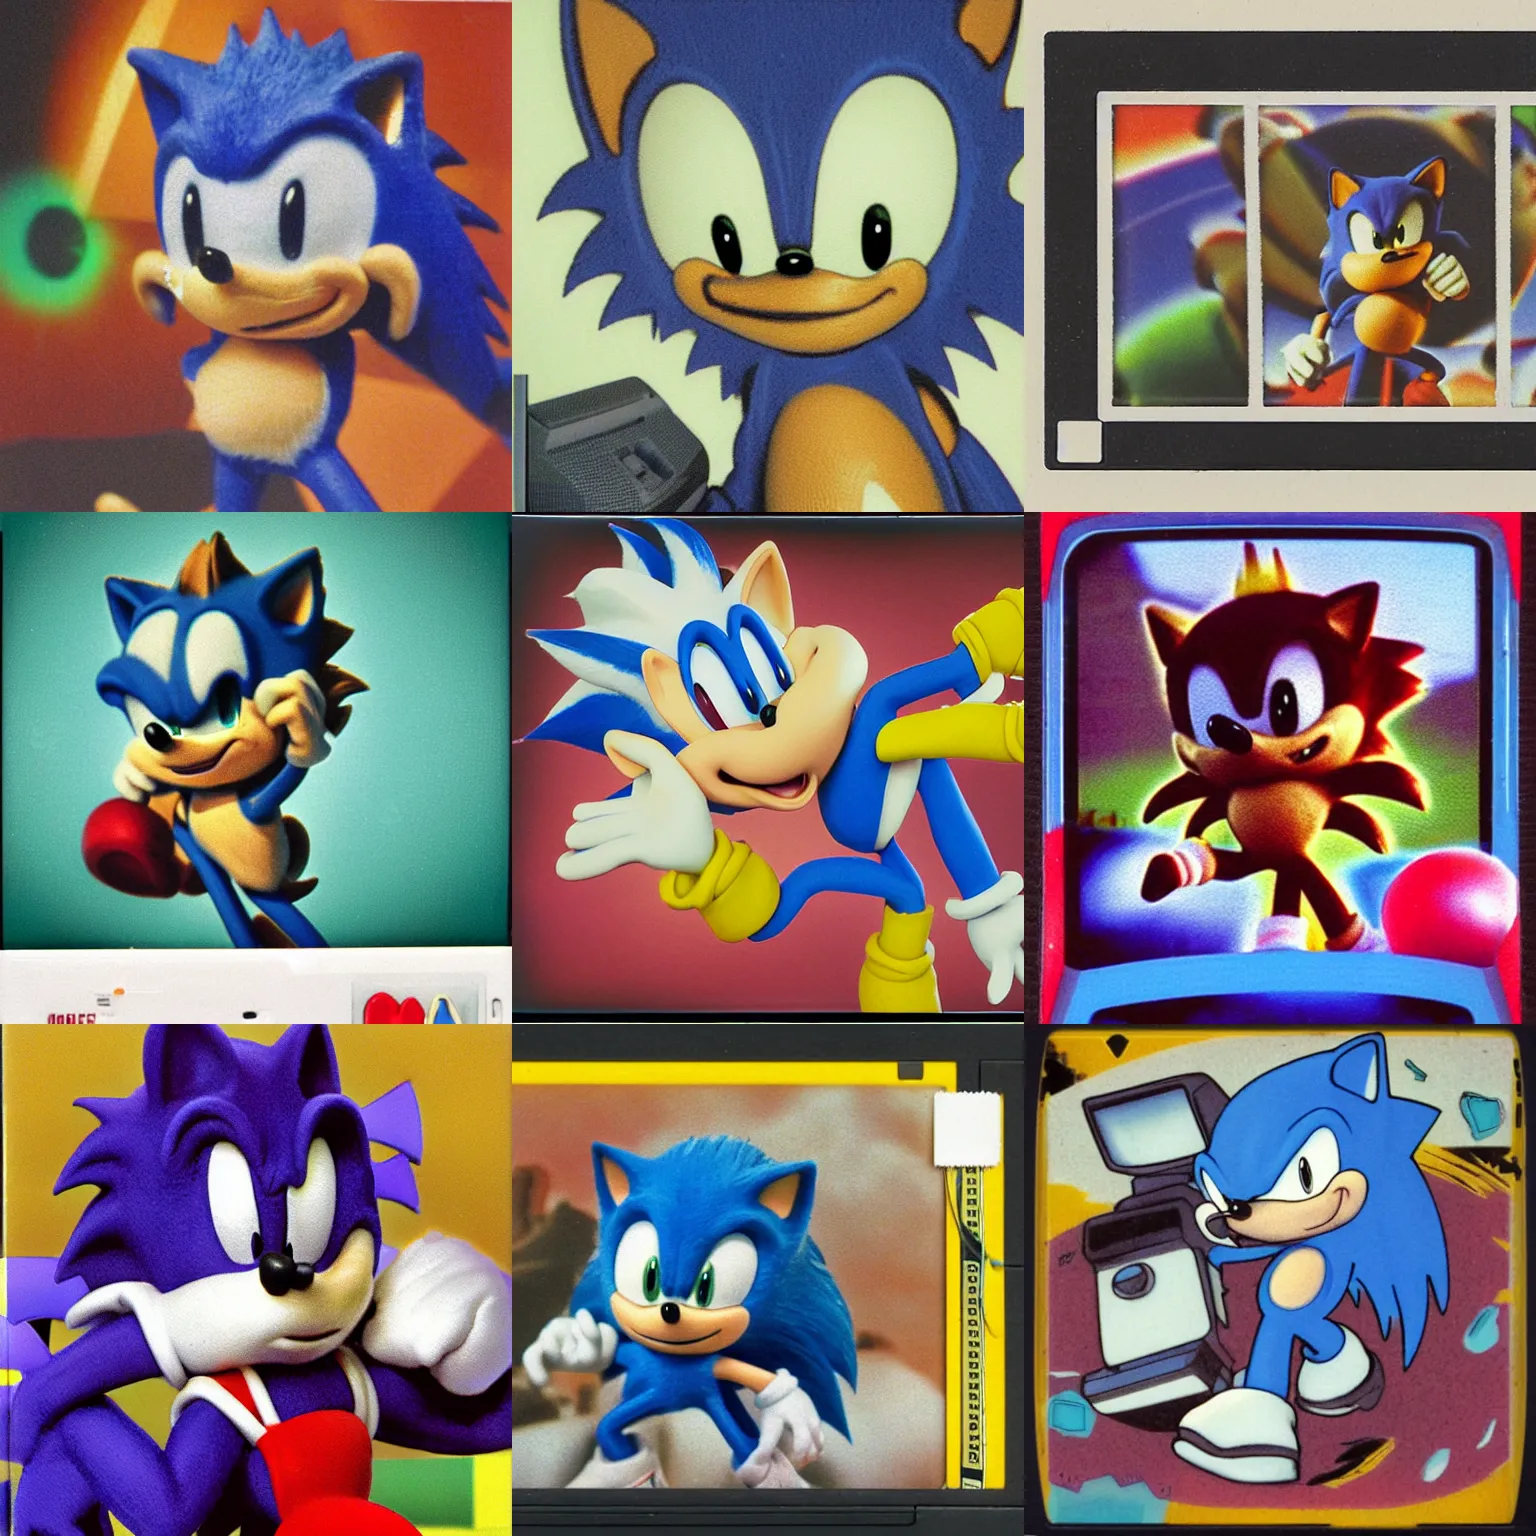 Prompt: polaroid closeup sonic the hedgehog dreaming of puffy portrait colossal claymation shpongle james gurney scifi matte painting landscape of a surreal acid, sonic the hedgehog retro moulded domineering craven chubby soggy roomy noxious fluttering checkerboard background 1 9 8 0 s 1 9 8 2 sega genesis video game album cover